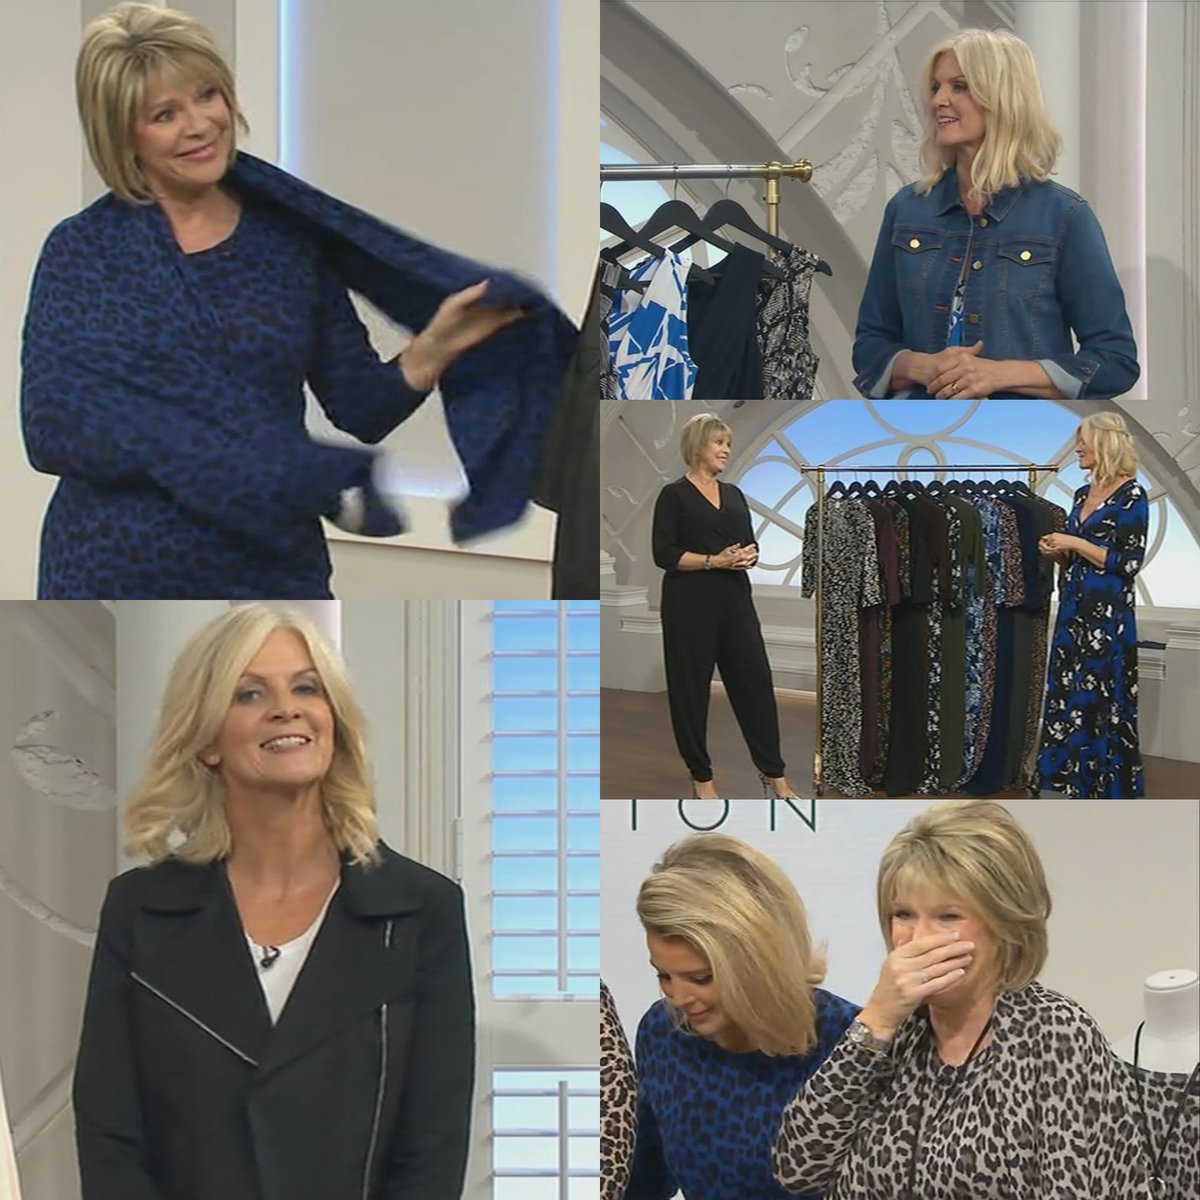 It's Thursday which means #RuthFashionEdit night...but also, #RuthLangsfordFashion night too! 

@RuthieeL and @jackiekabler are on hand to bring you all the fun, all the fashion and lots of laughs too for a whole two hours!

Don't miss out! 👗👕👚

7pm, @qvcuk